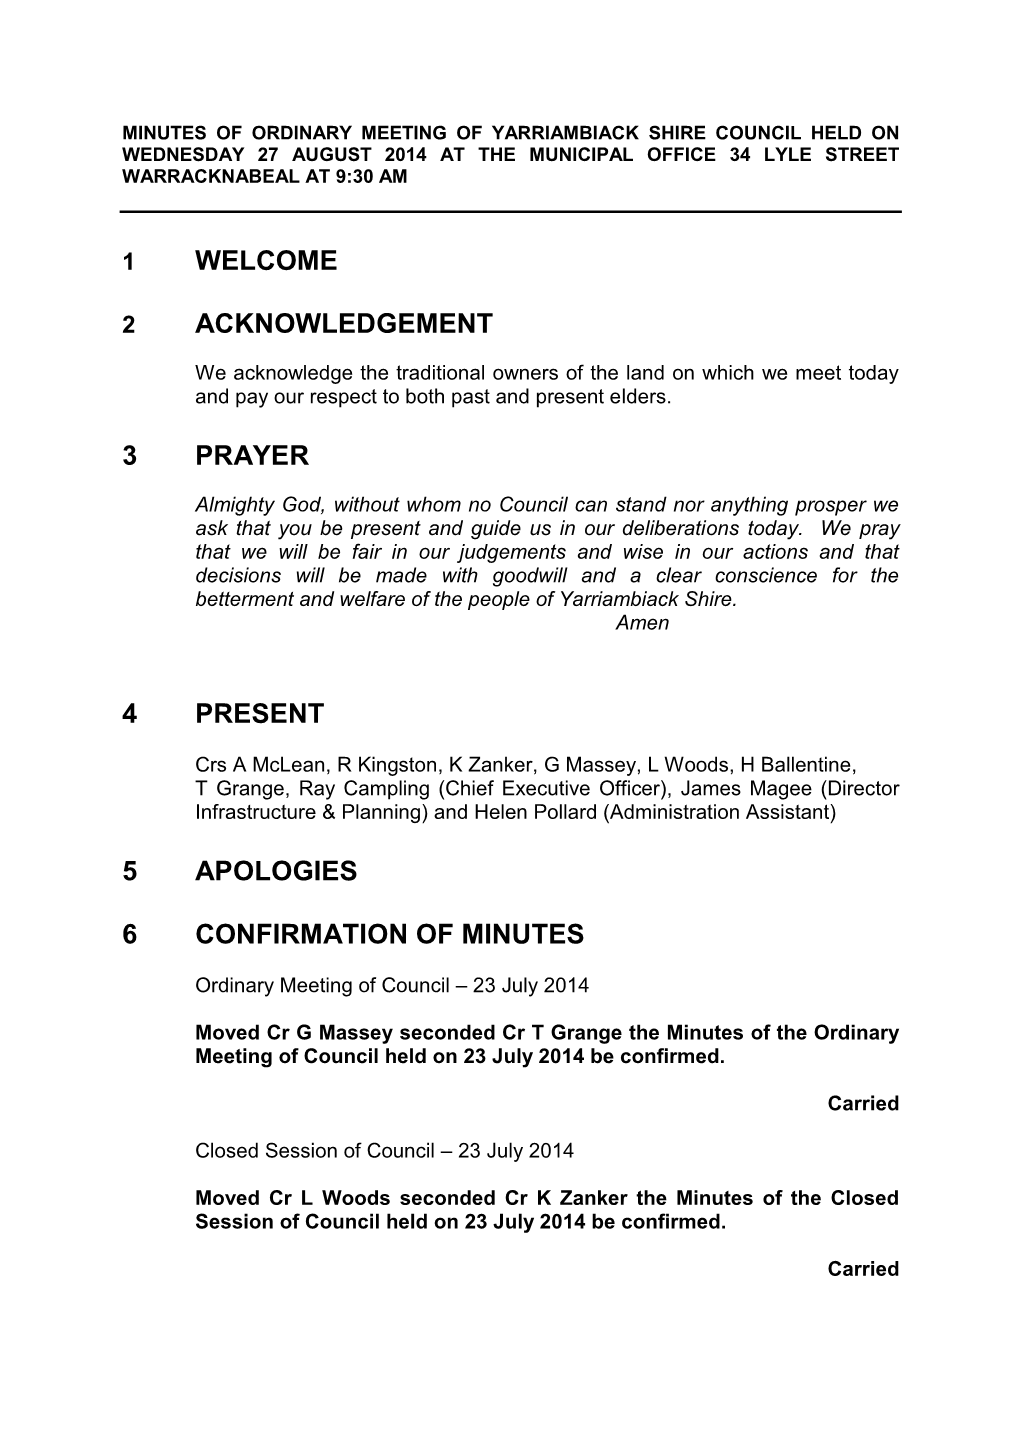 Agenda of the Council Meeting of the Yarriambiack